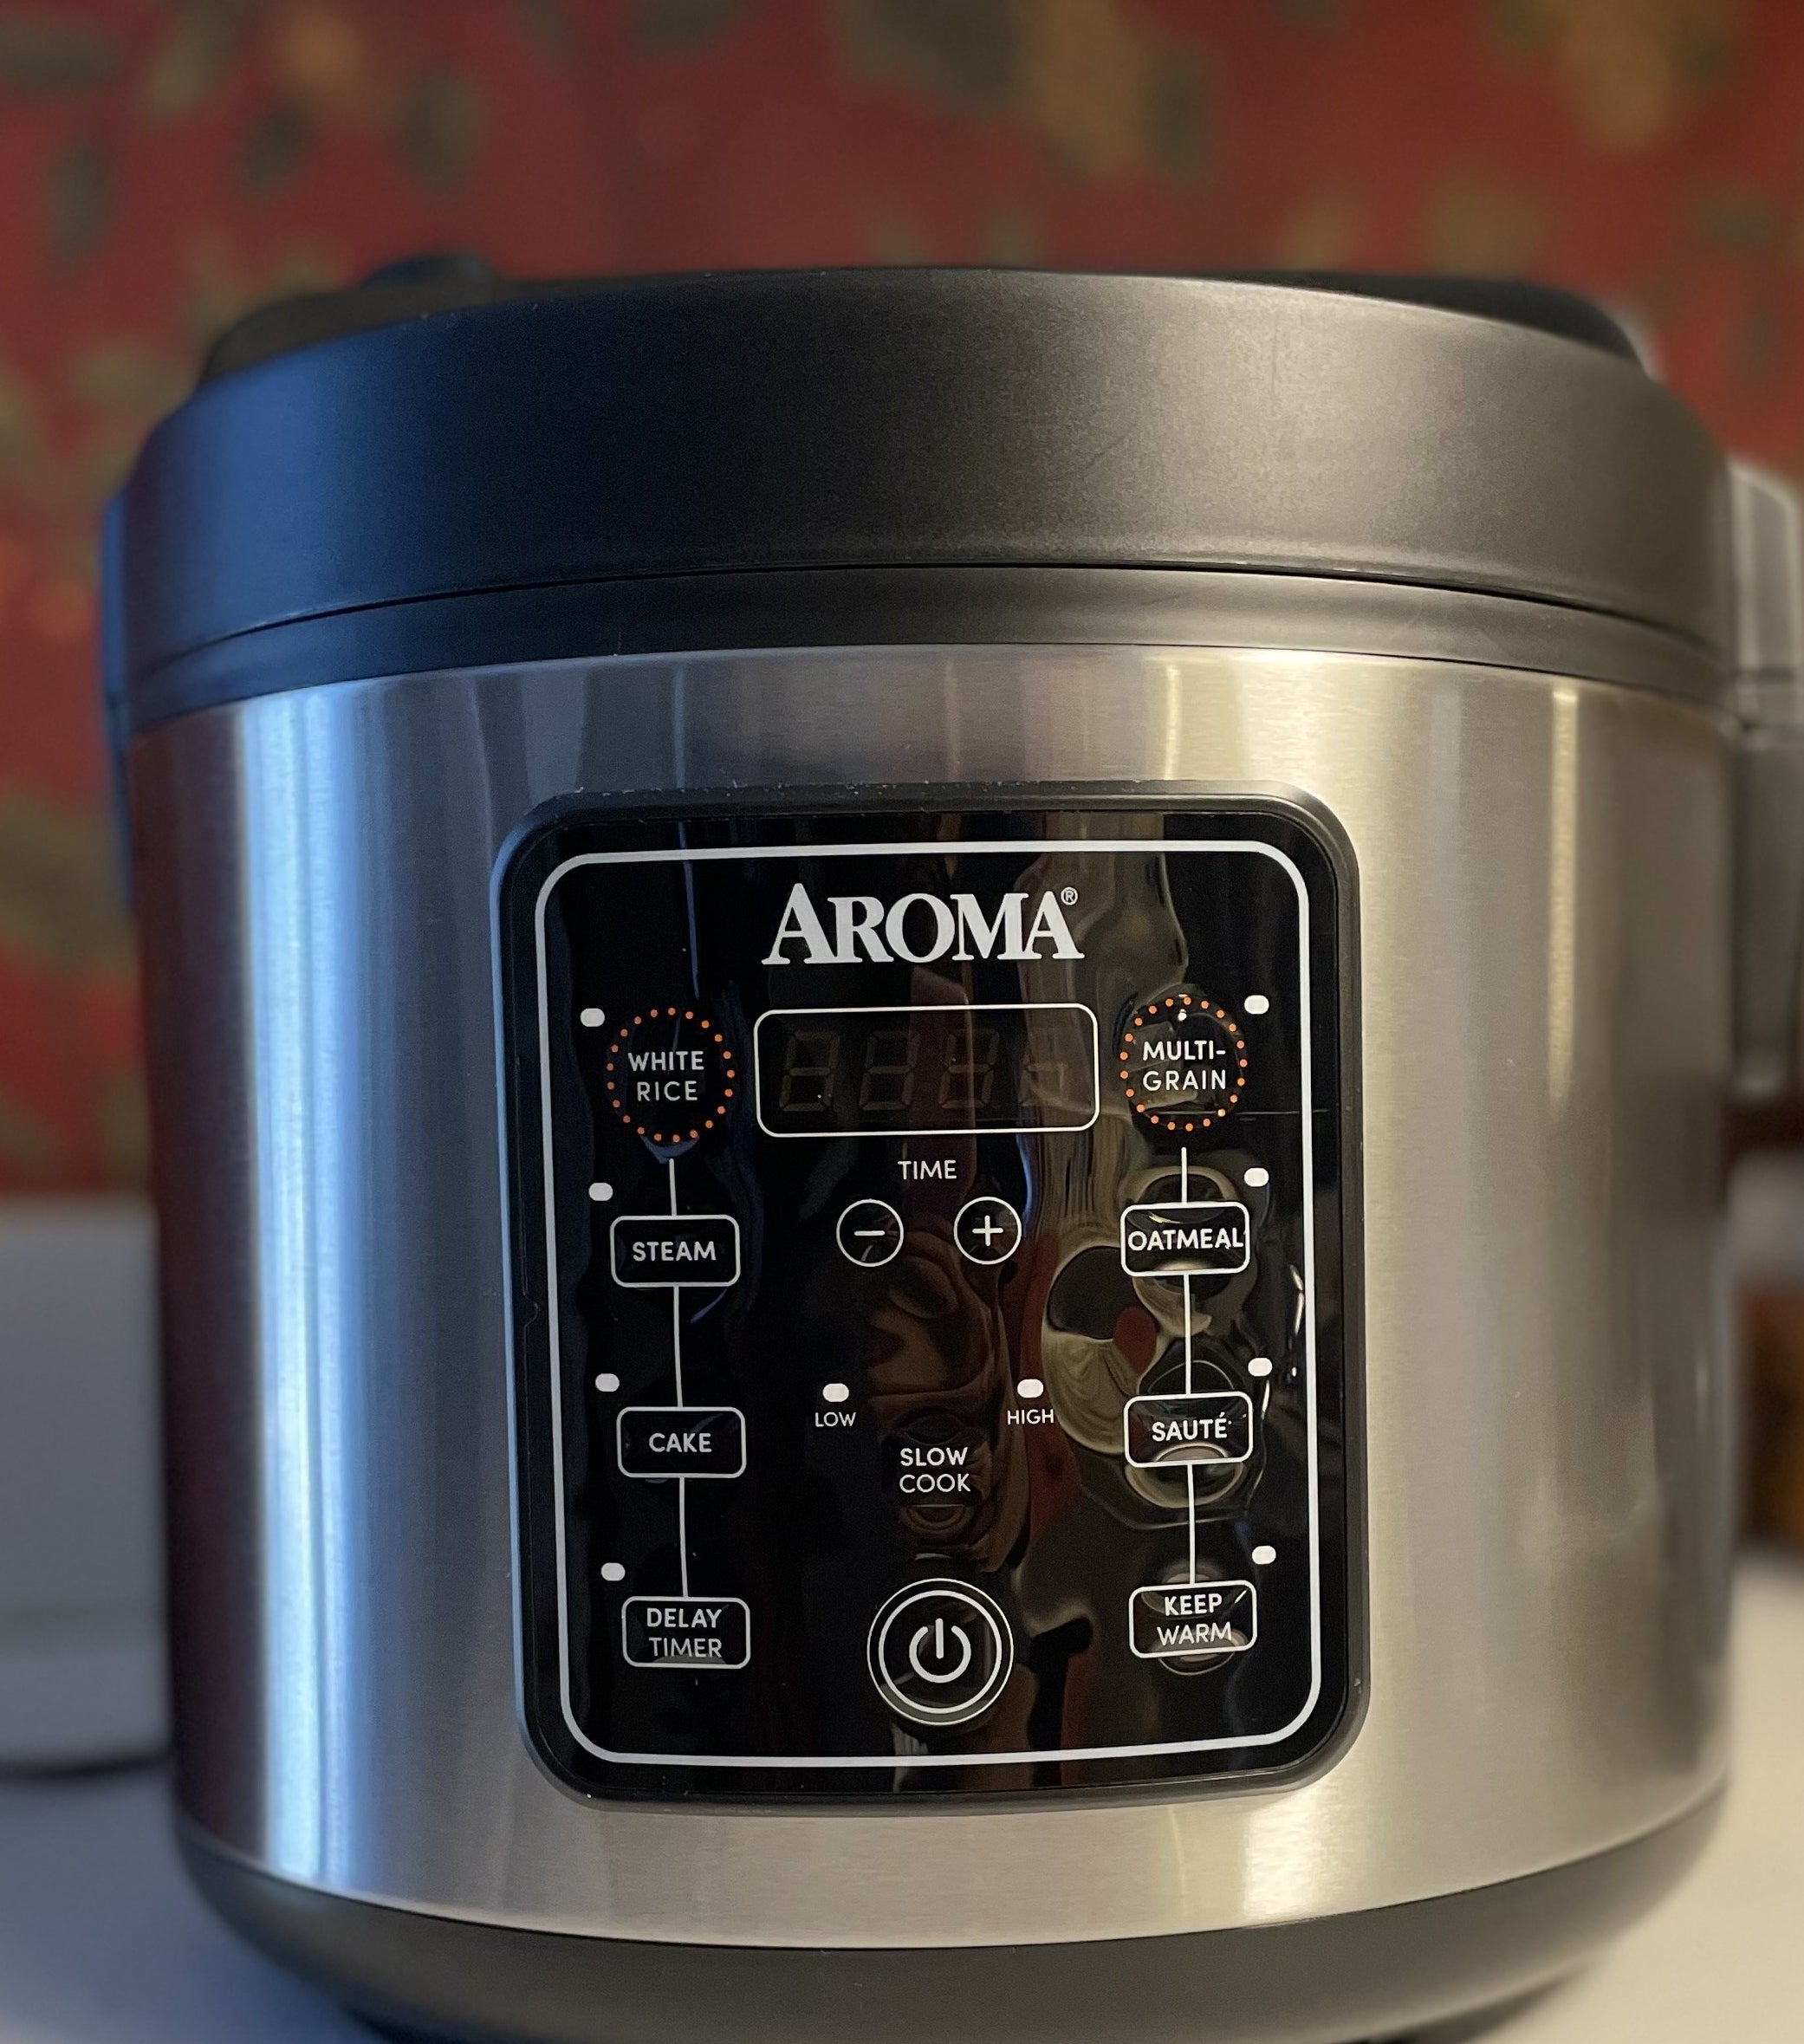 Aroma 20 Cup Professional Rice Cooker & Reviews